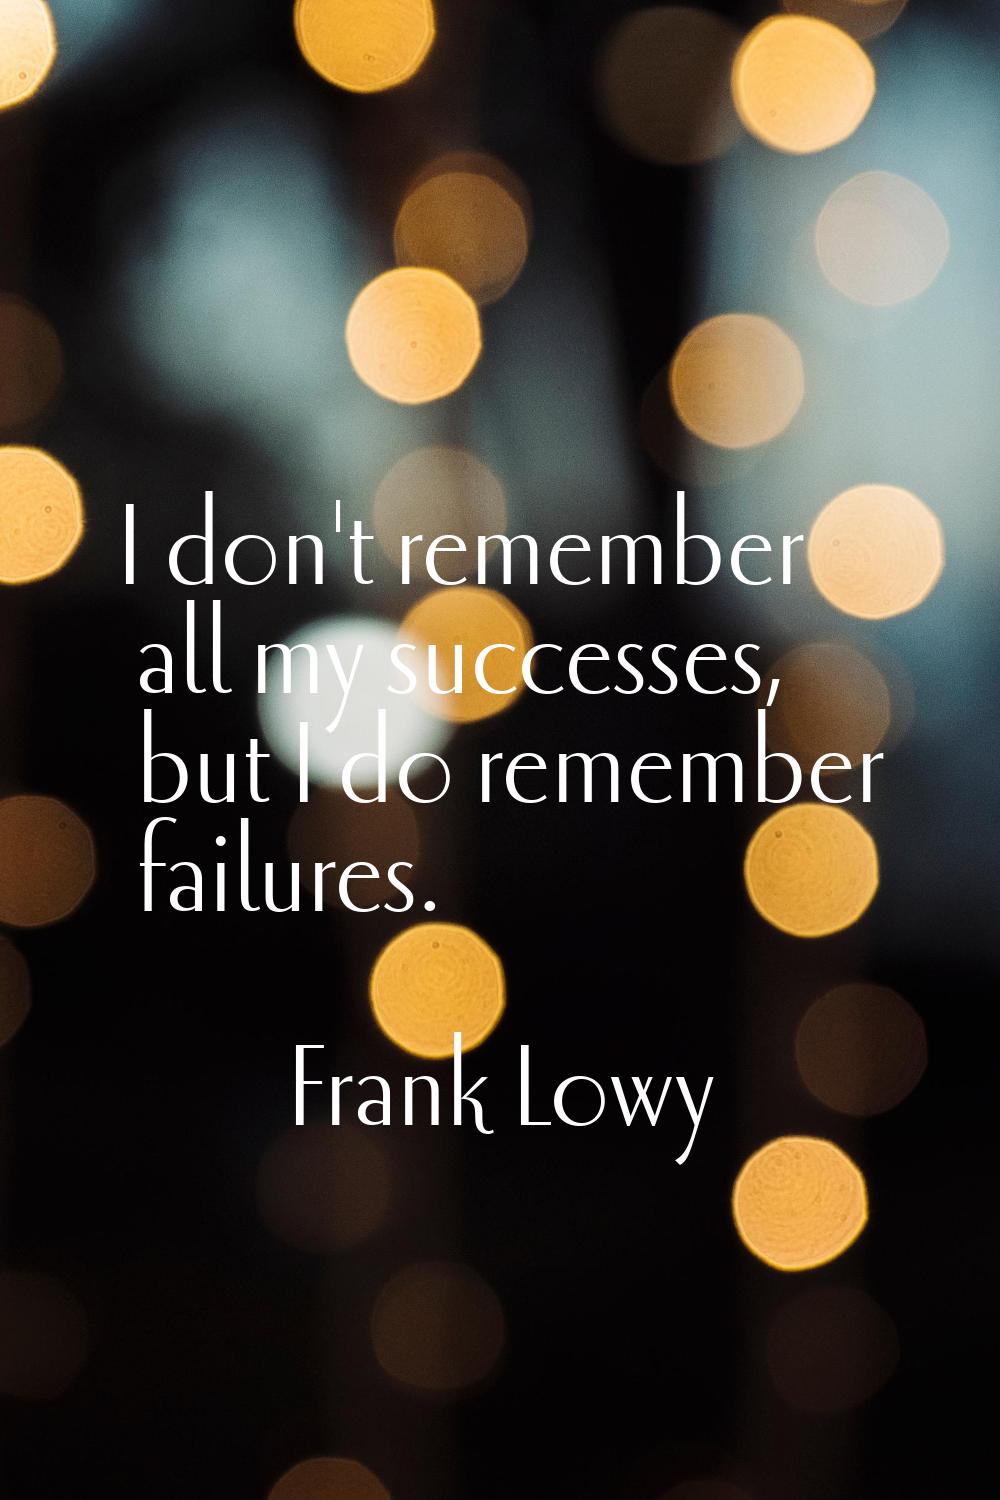 I don't remember all my successes, but I do remember failures.